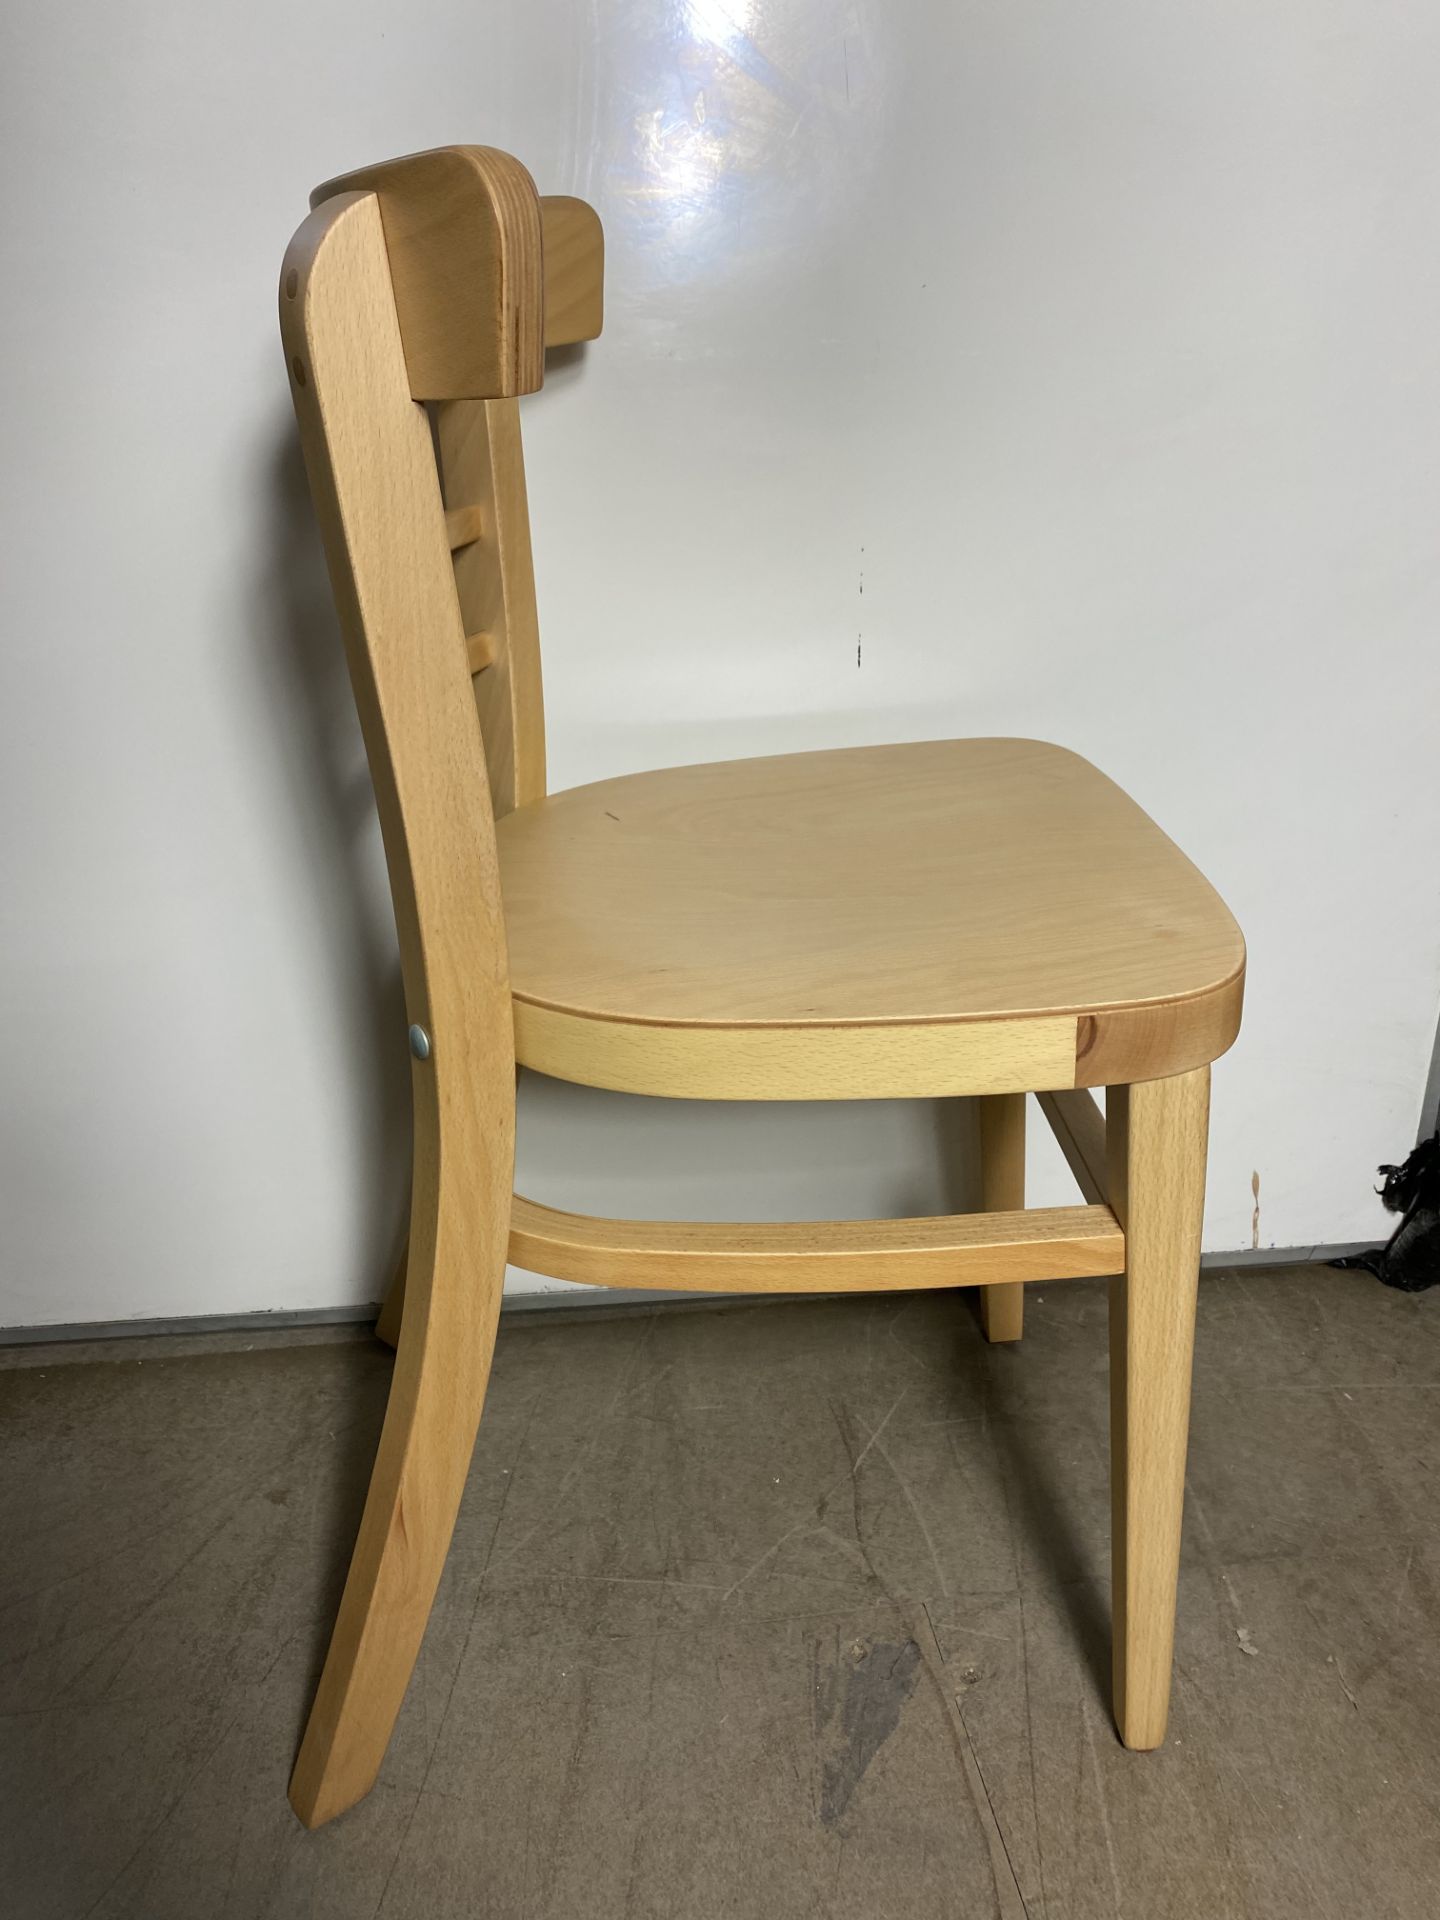 4 x Espresso Side Chairs | 3060628 - Image 3 of 6